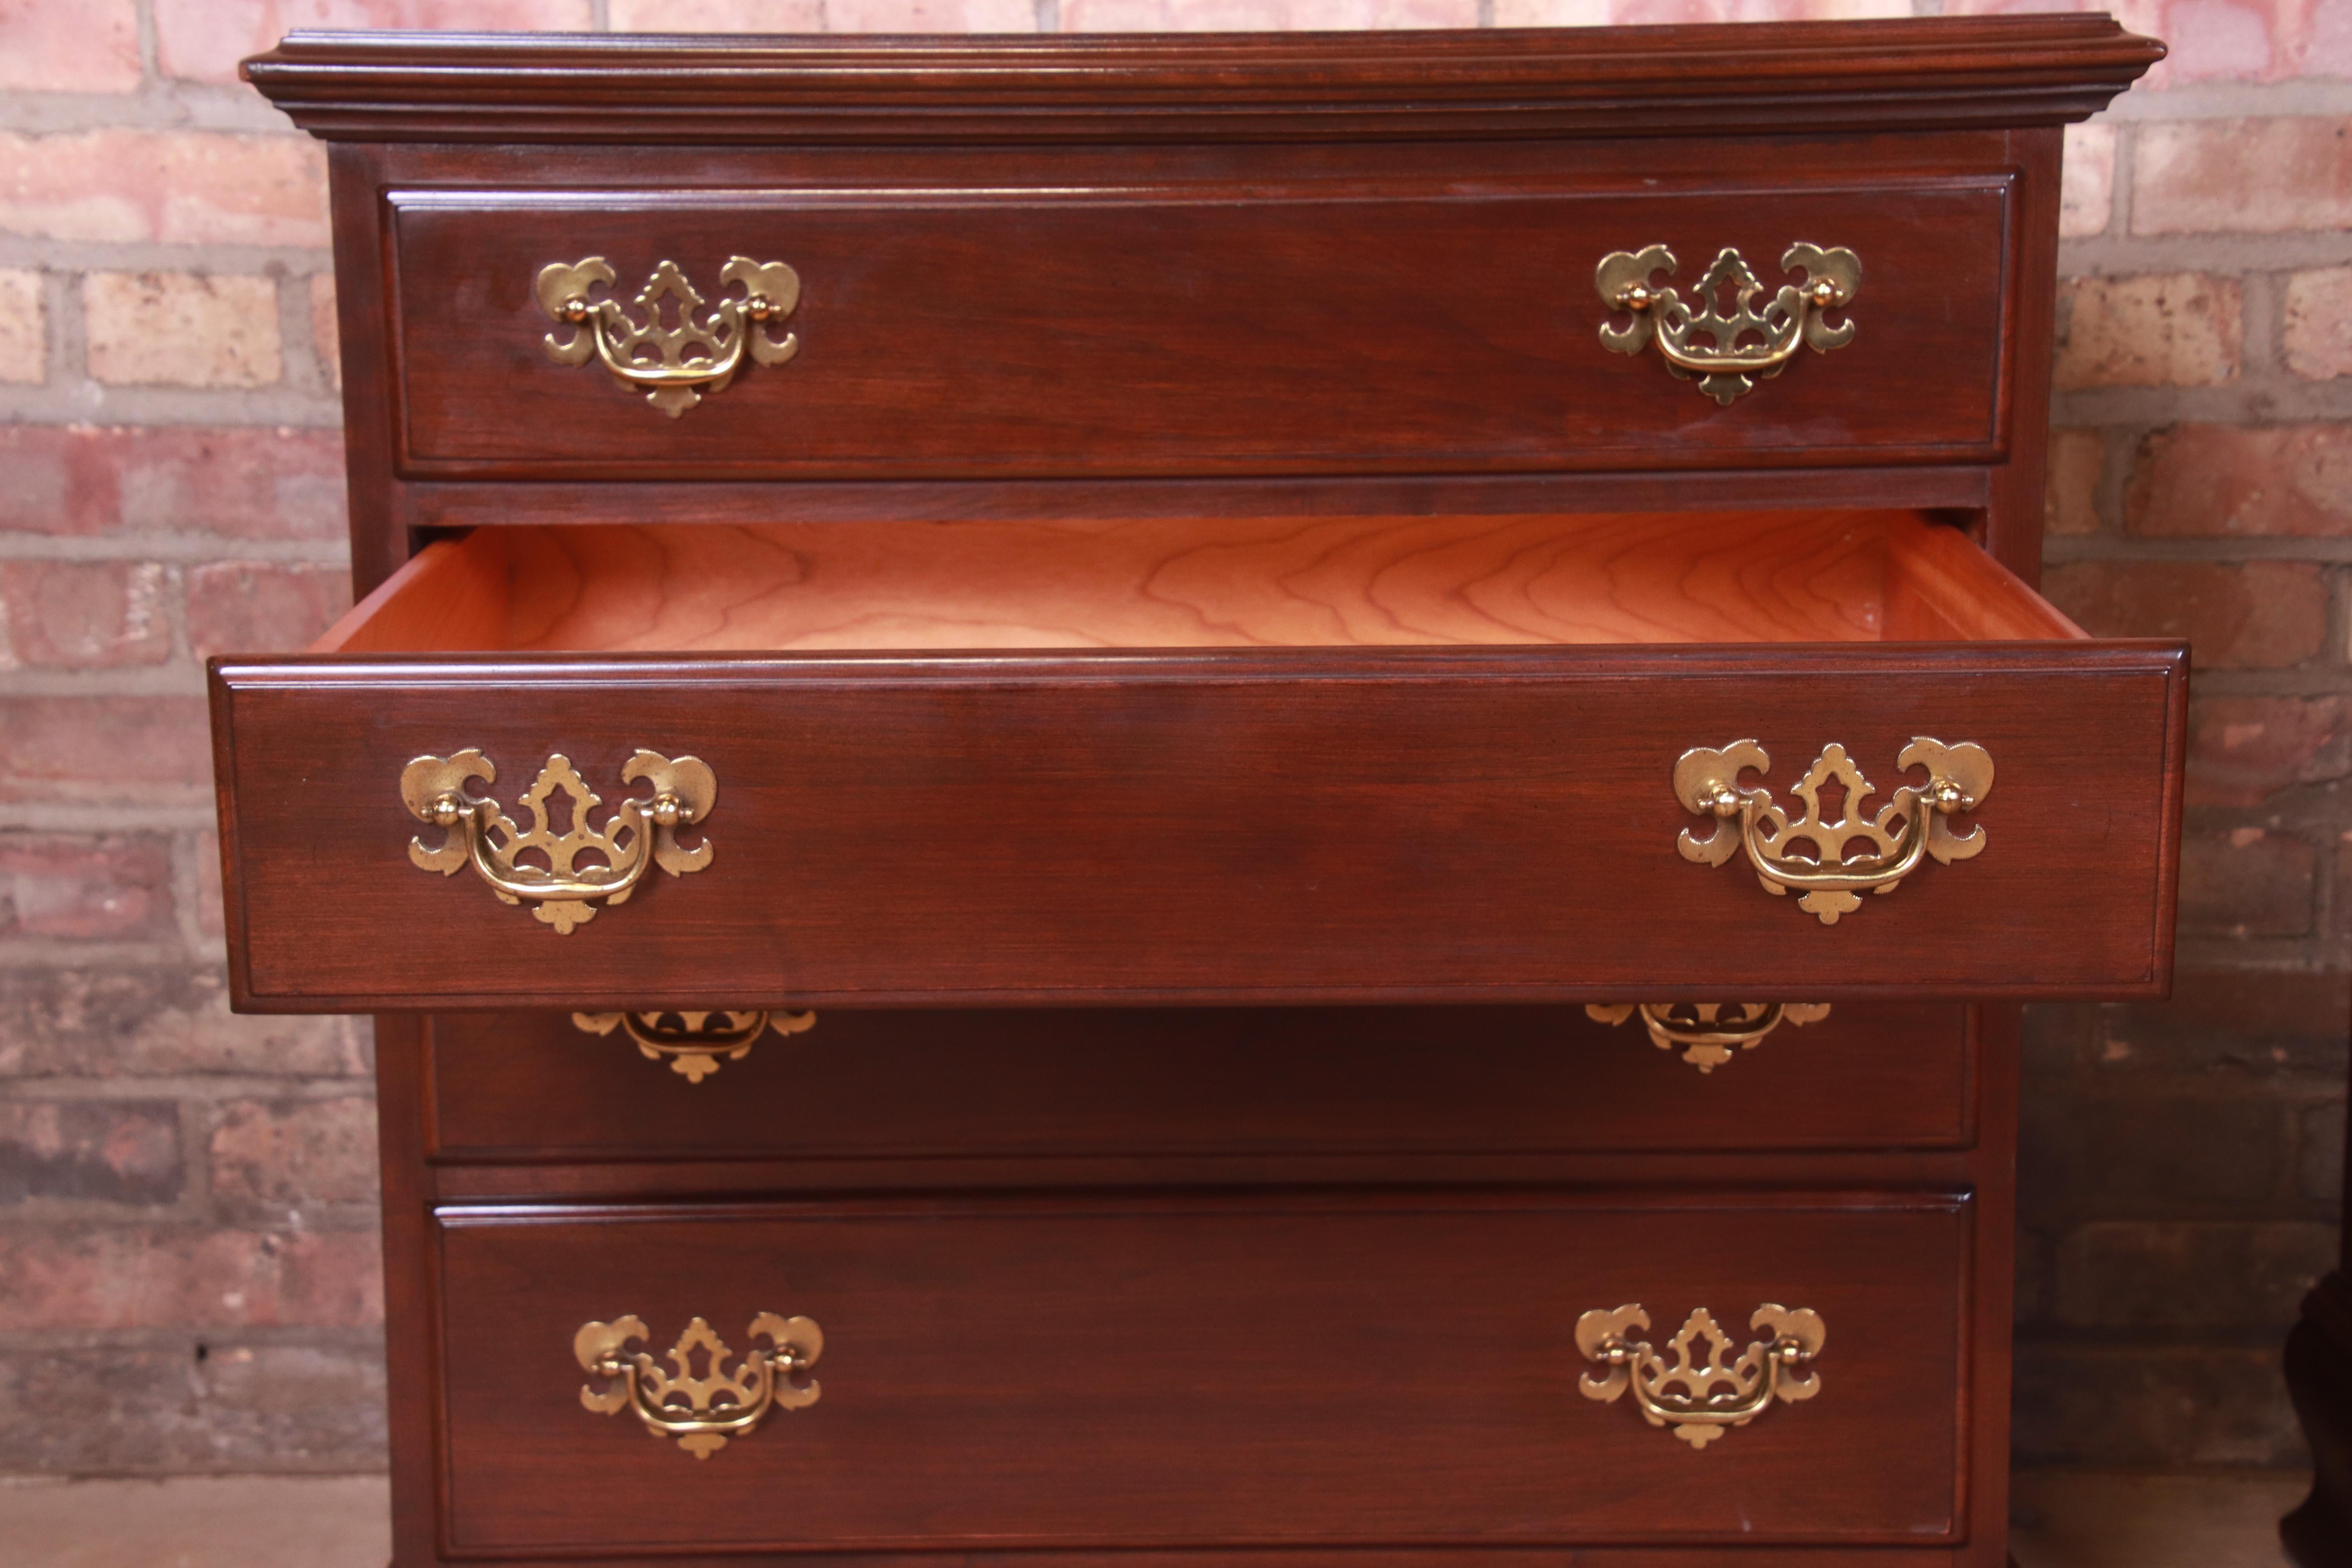 Ethan Allen Georgian Mahogany Four-Drawer Bedside Chests, Pair 6